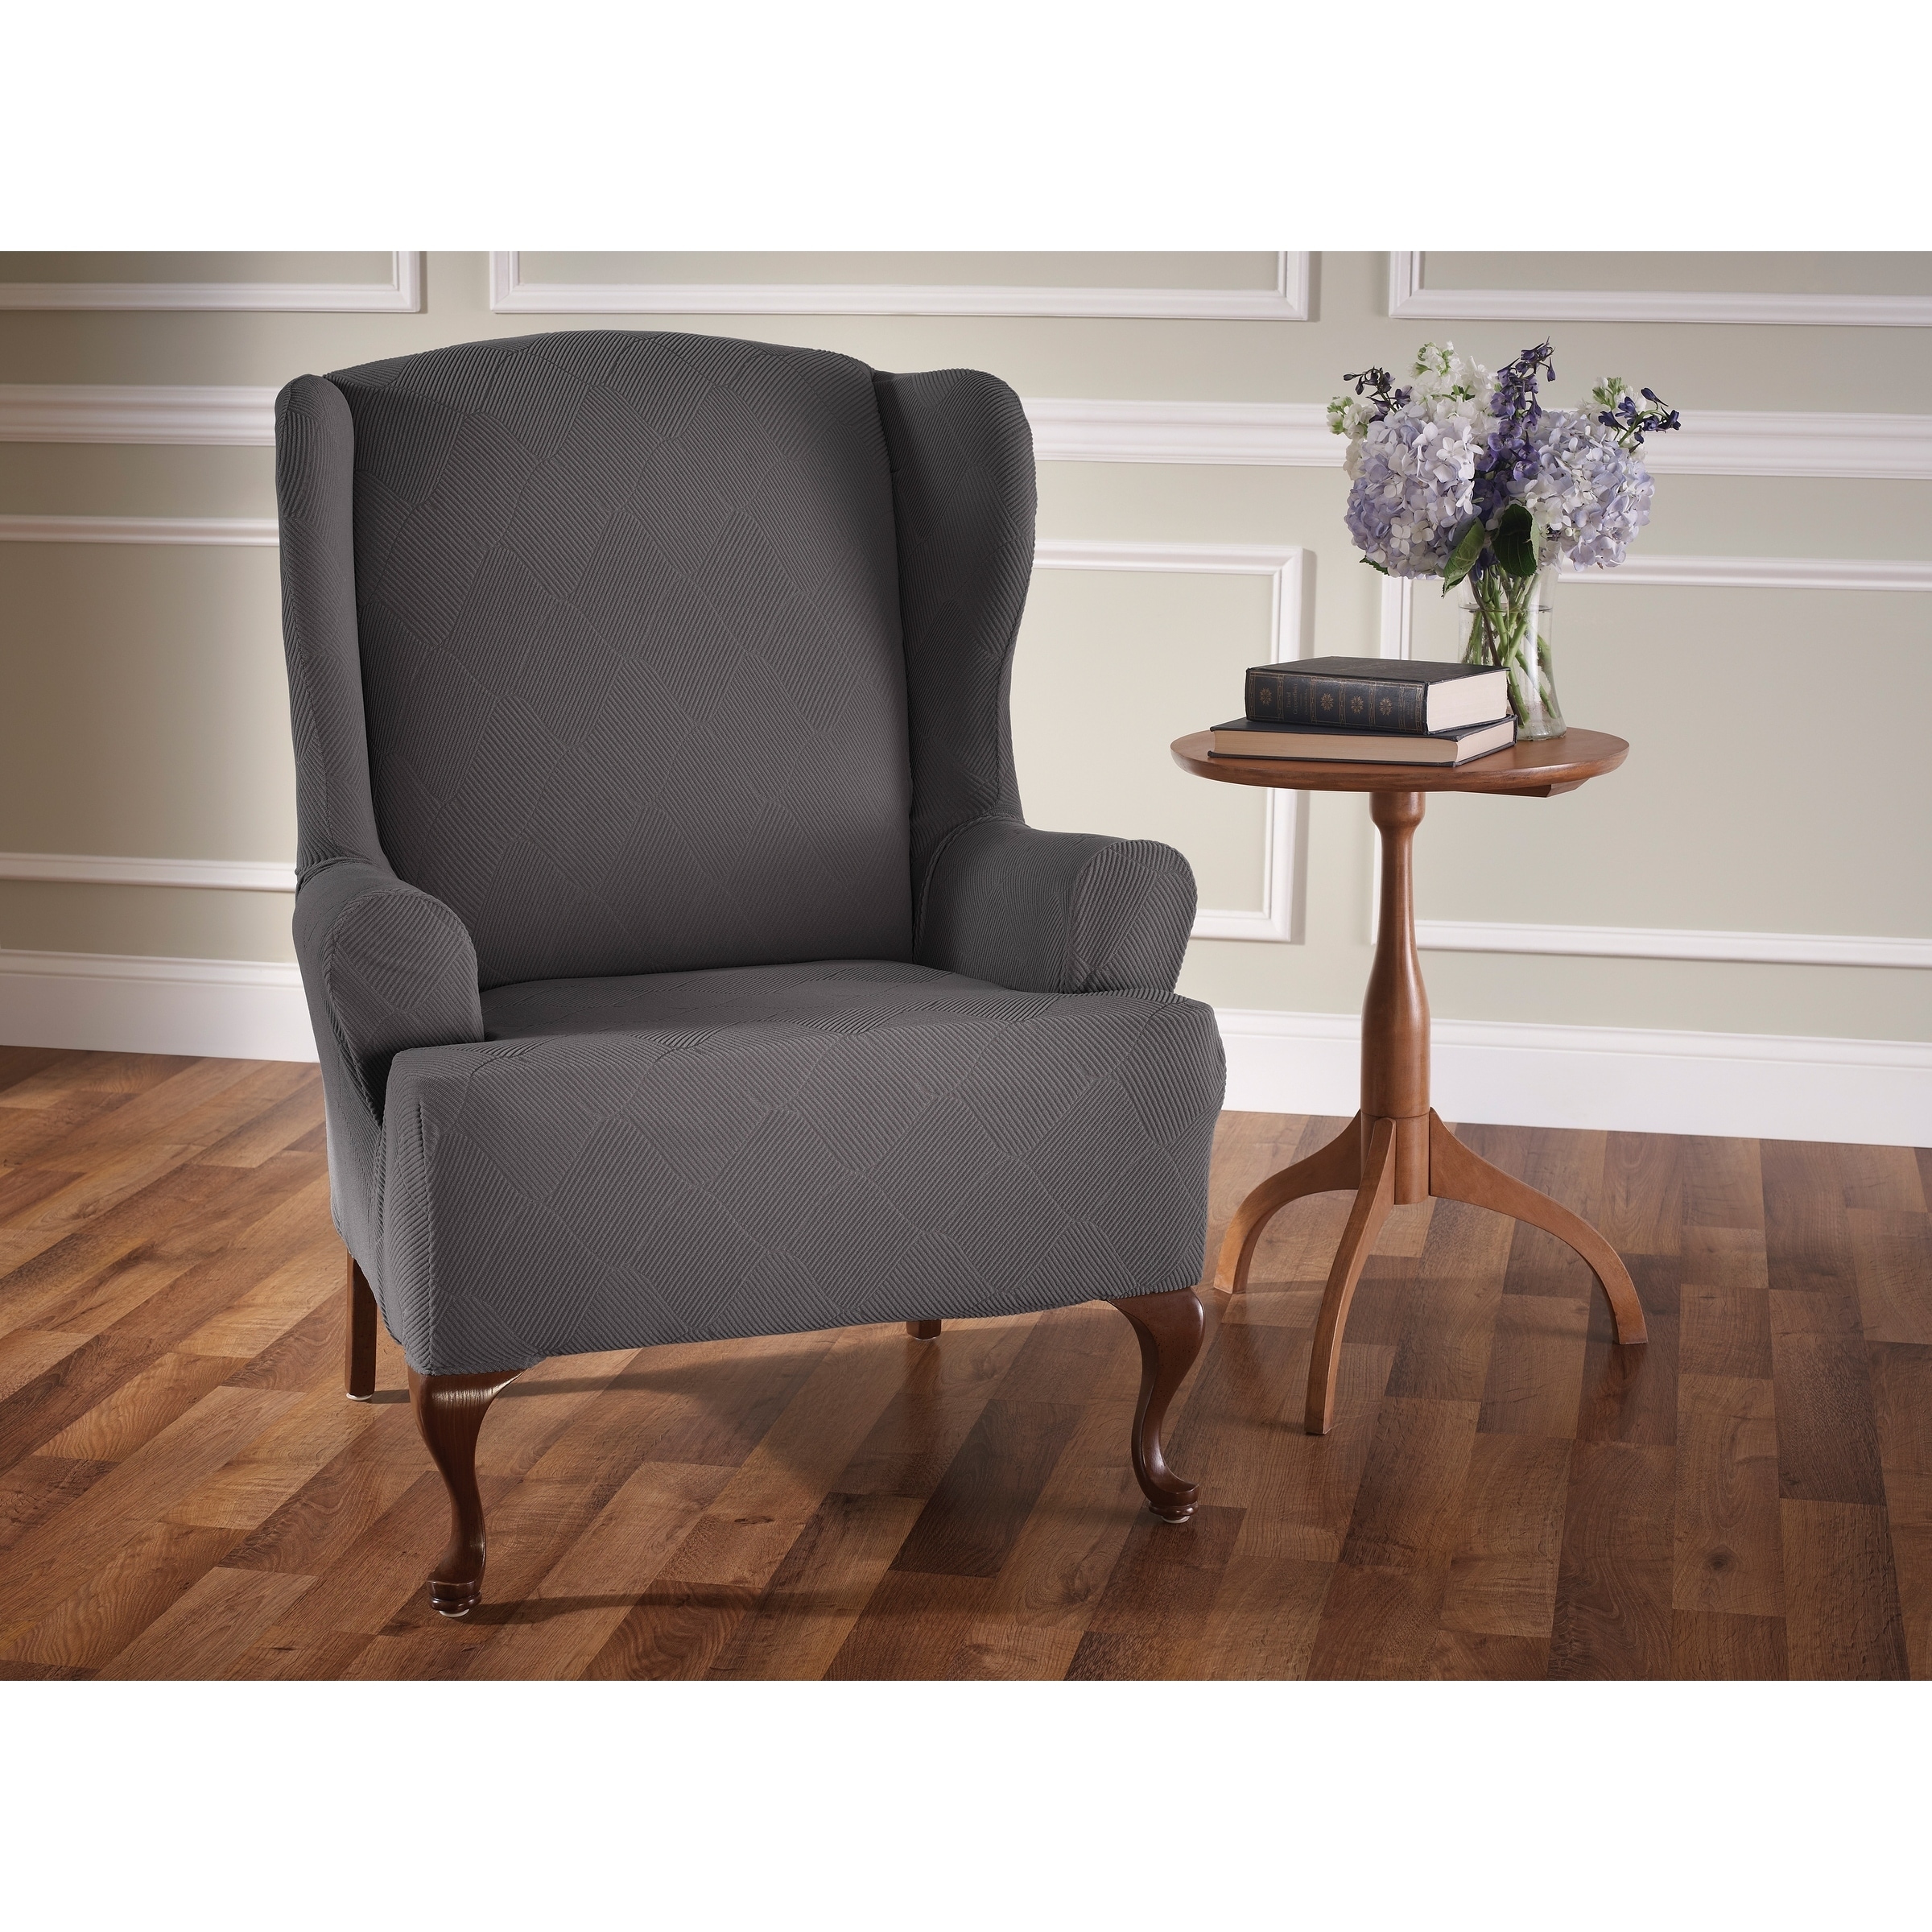 Sure Fit Stretch Plush Chevron Wing Chair Furniture Cover for sale online 